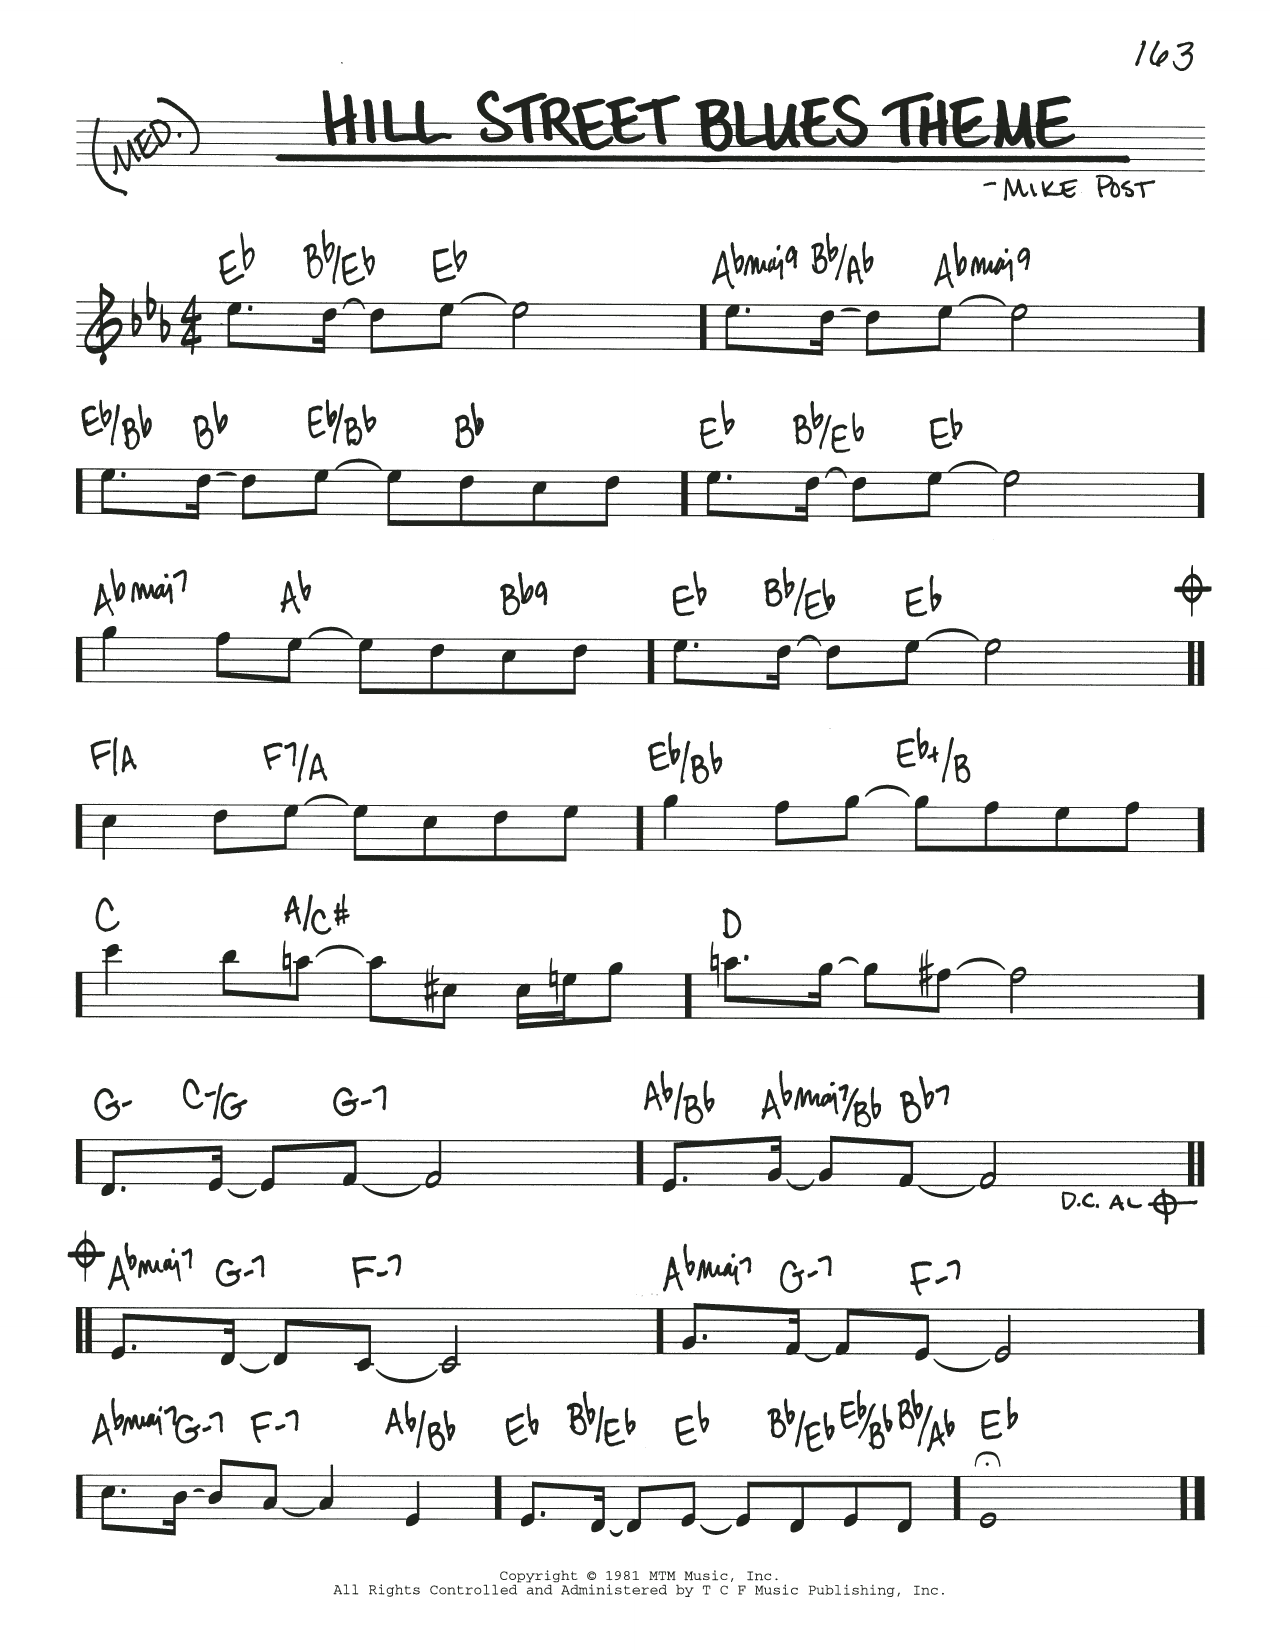 Download Mike Post Hill Street Blues Theme Sheet Music